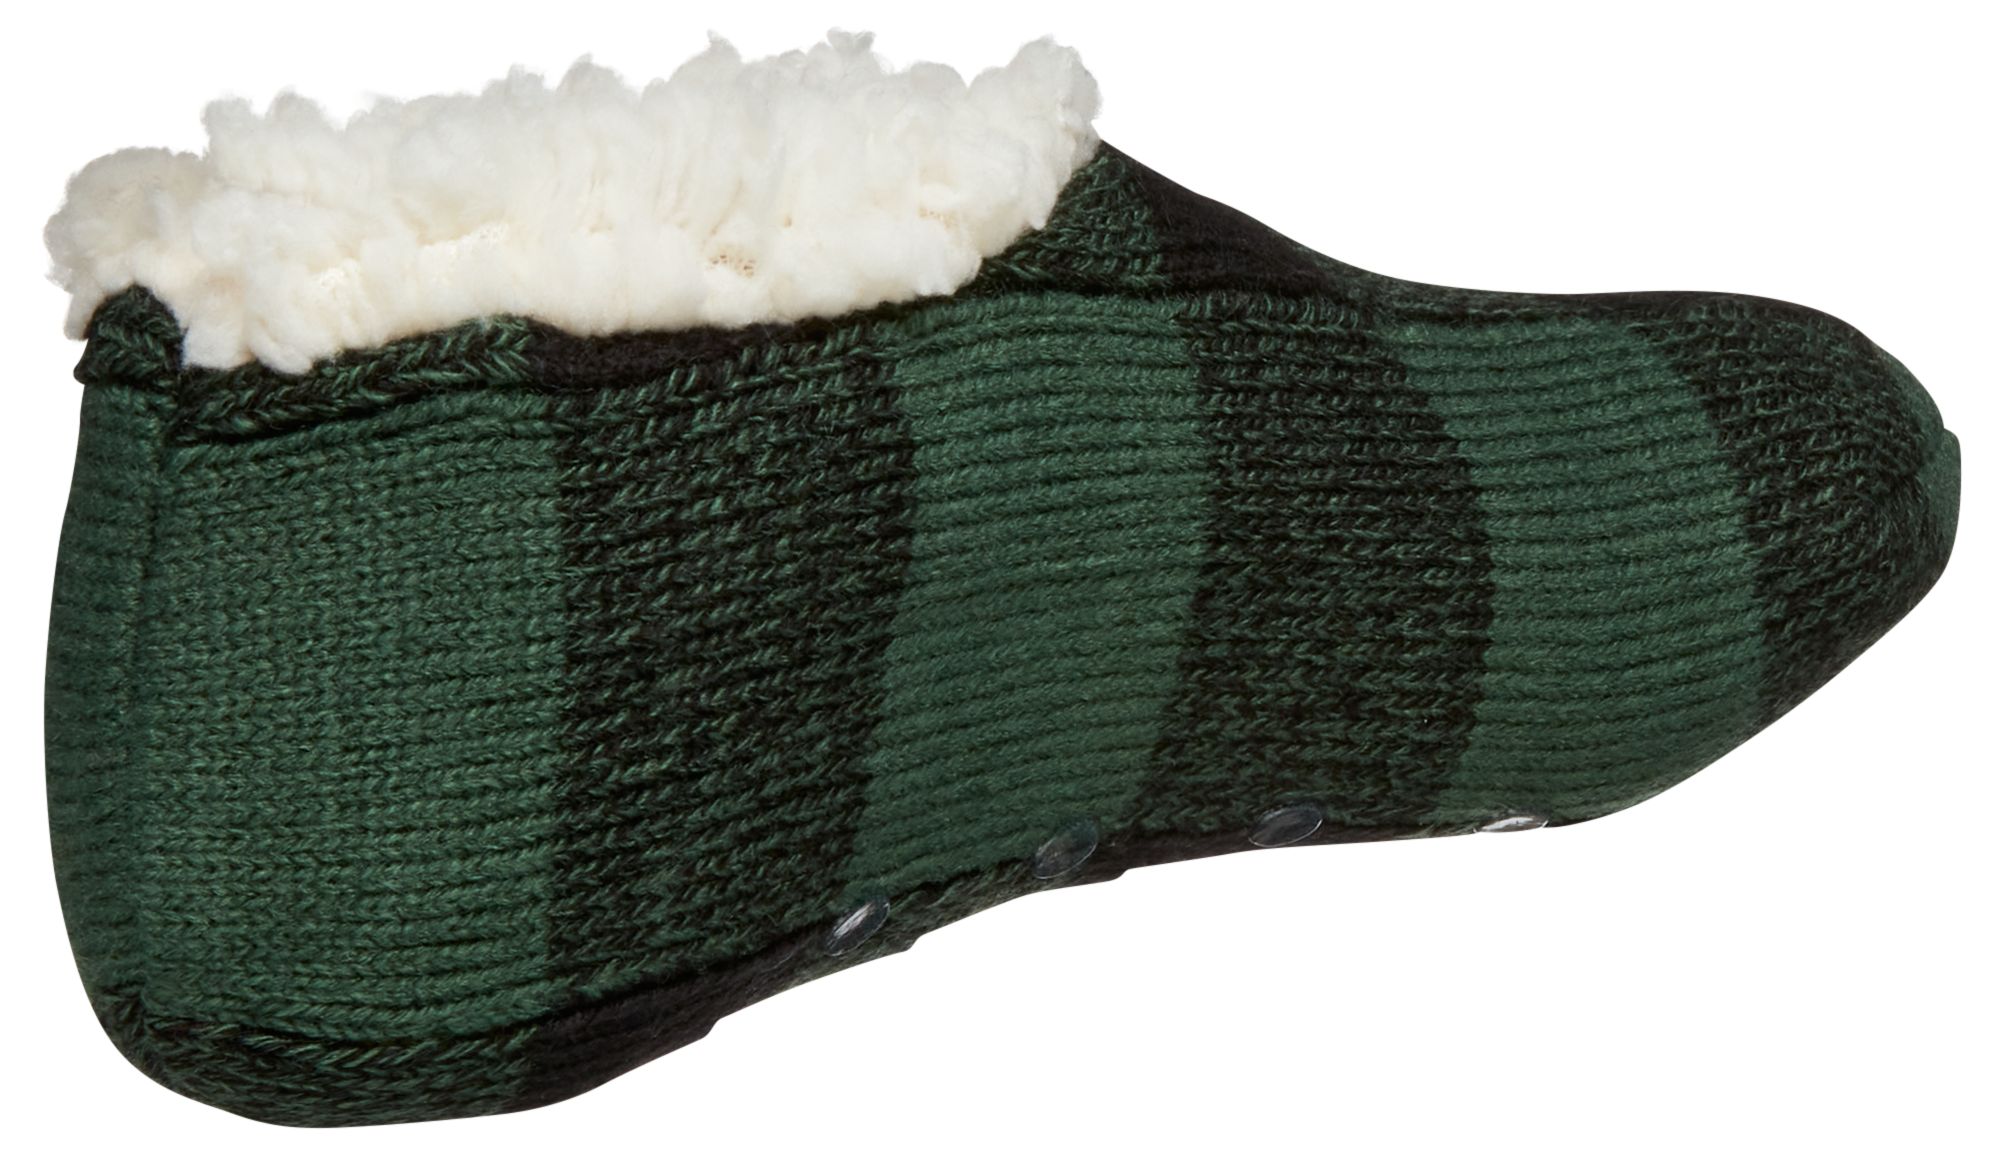 Northeast Outfitters Women's Cozy Cabin Holiday Buff Check Slipper Socks